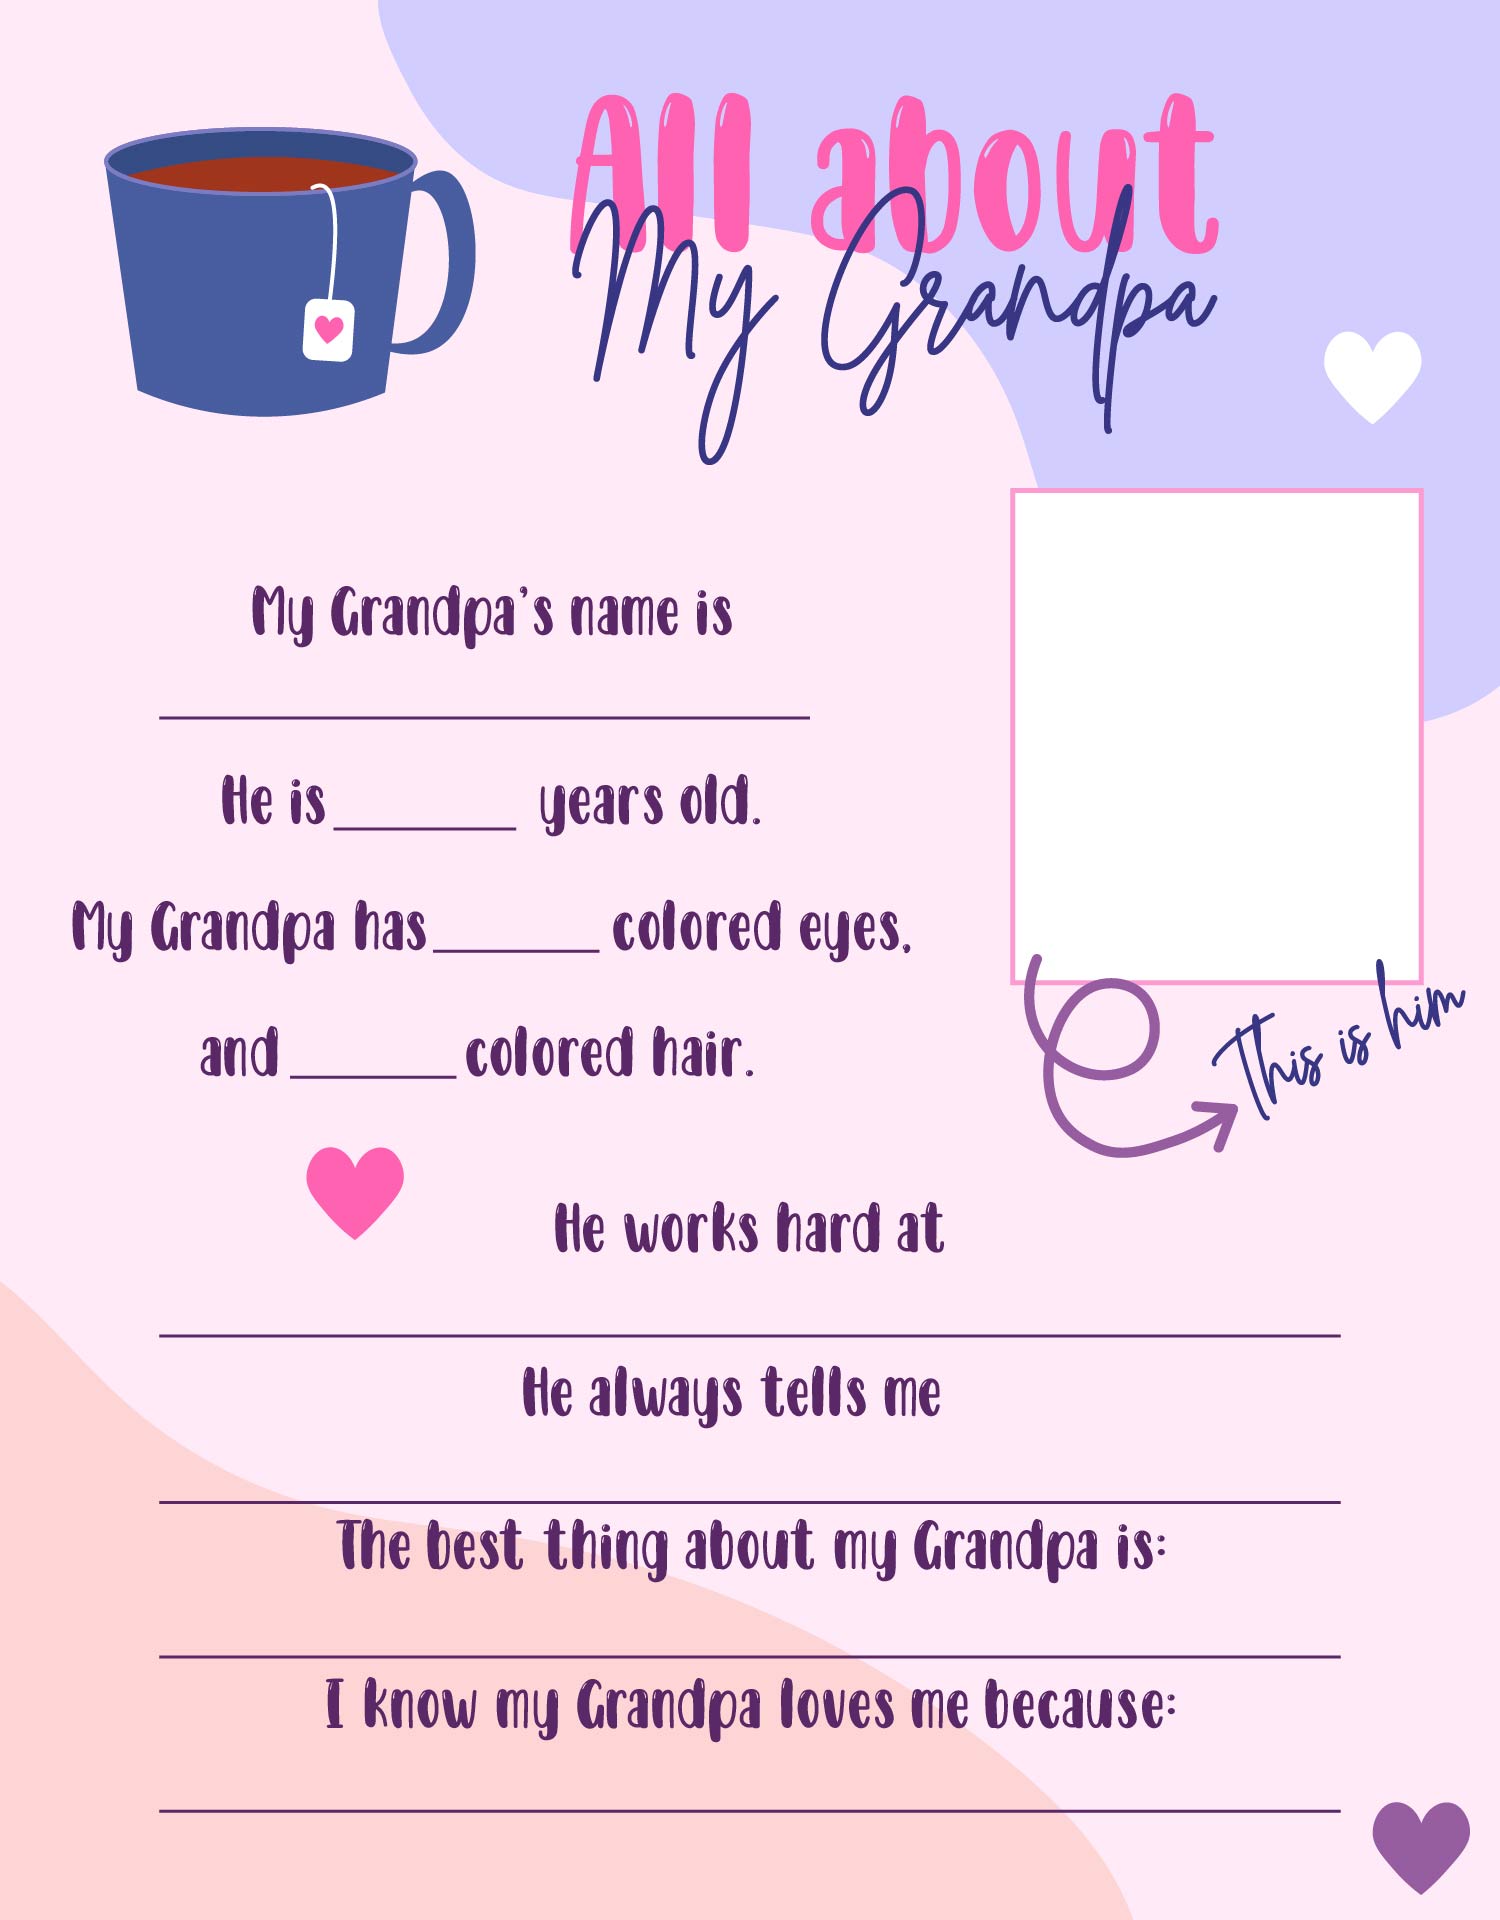 All About My Grandpa for Fathers Day Printable